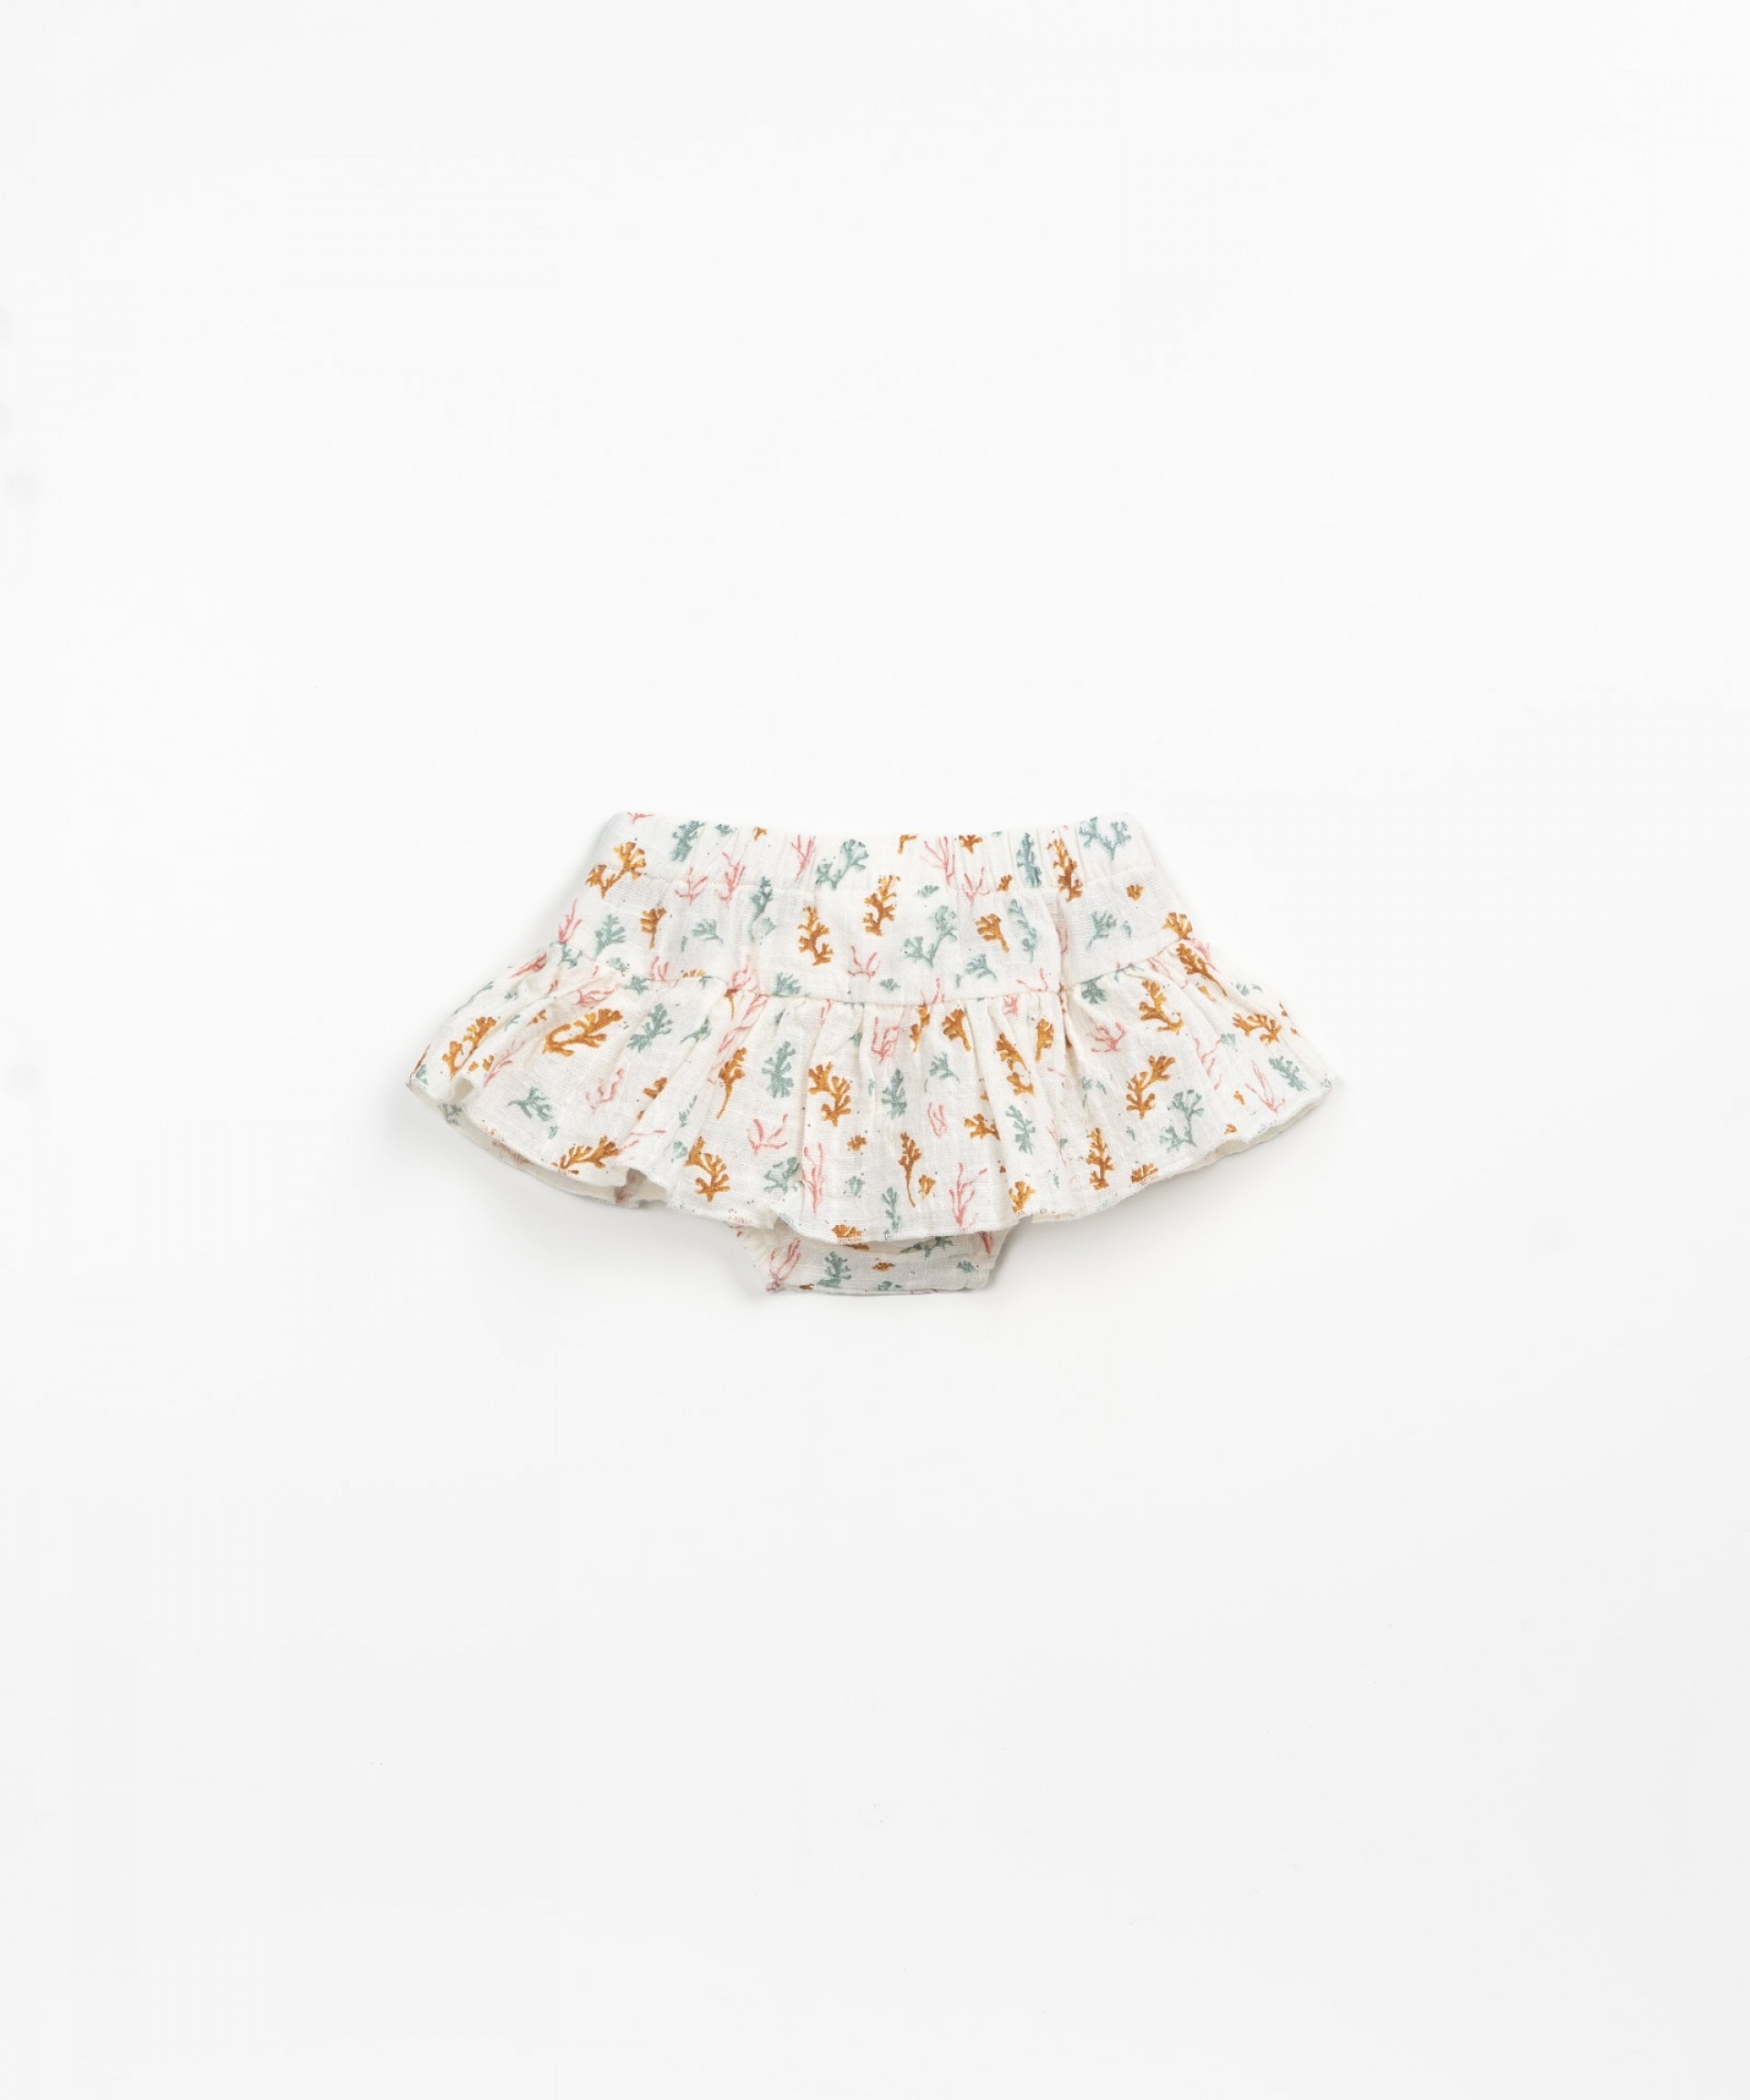 Woven underpants with seaweed print | Textile Art